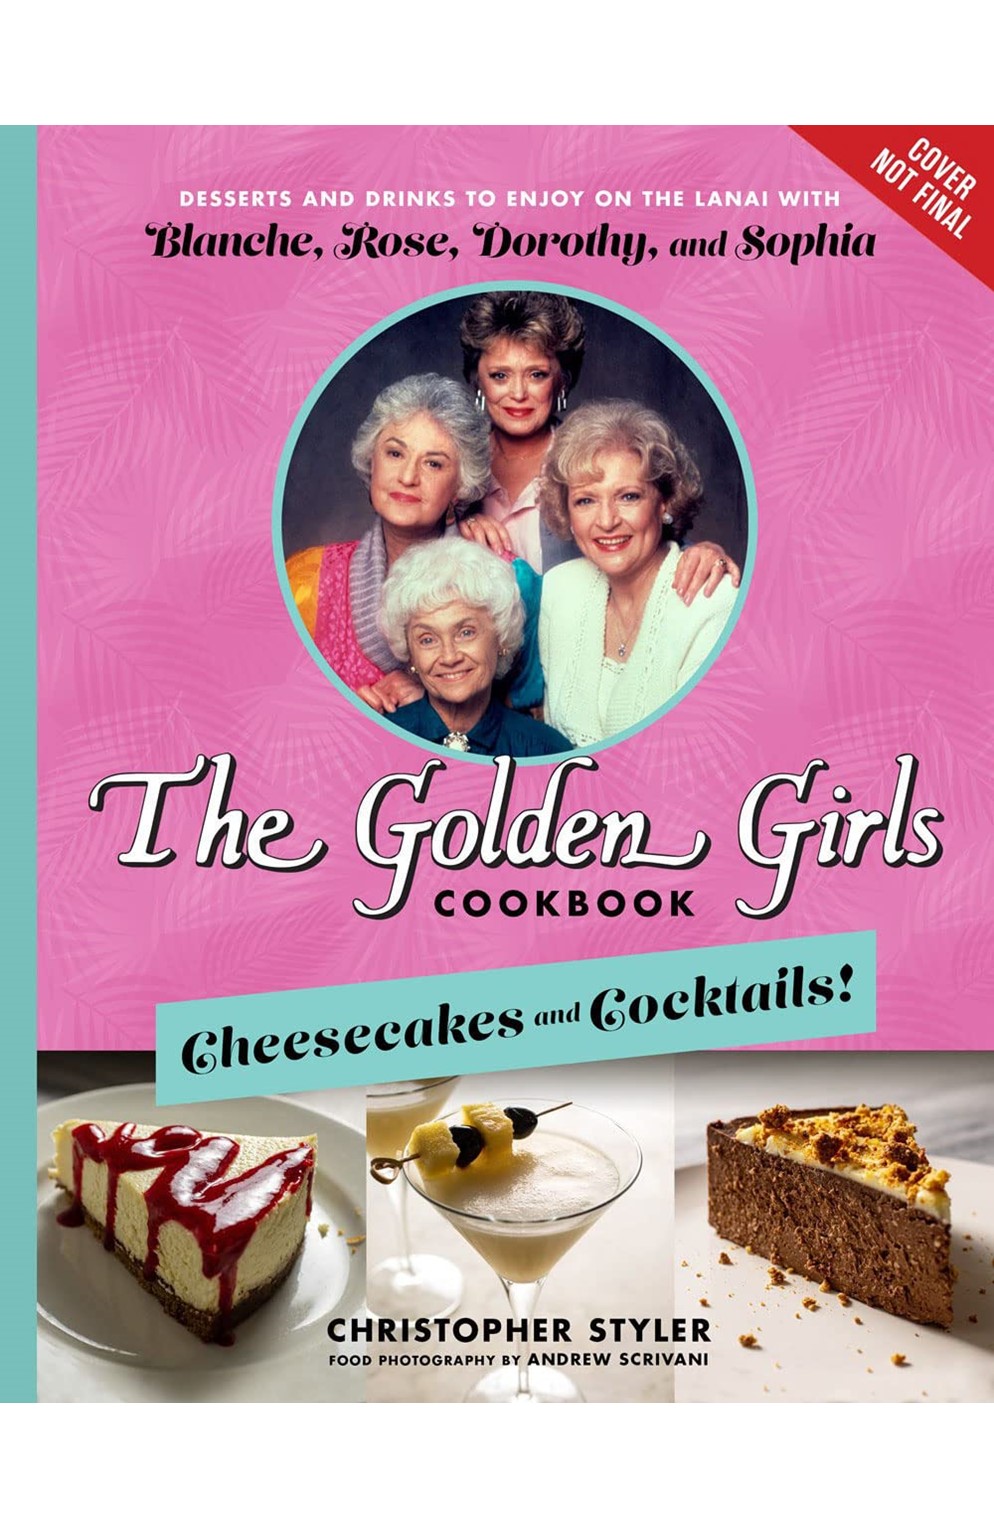 The Golden Girls Cookbook: Cheesecakes And Cocktails!: Desserts And Drinks To Enjoy On The Lanai